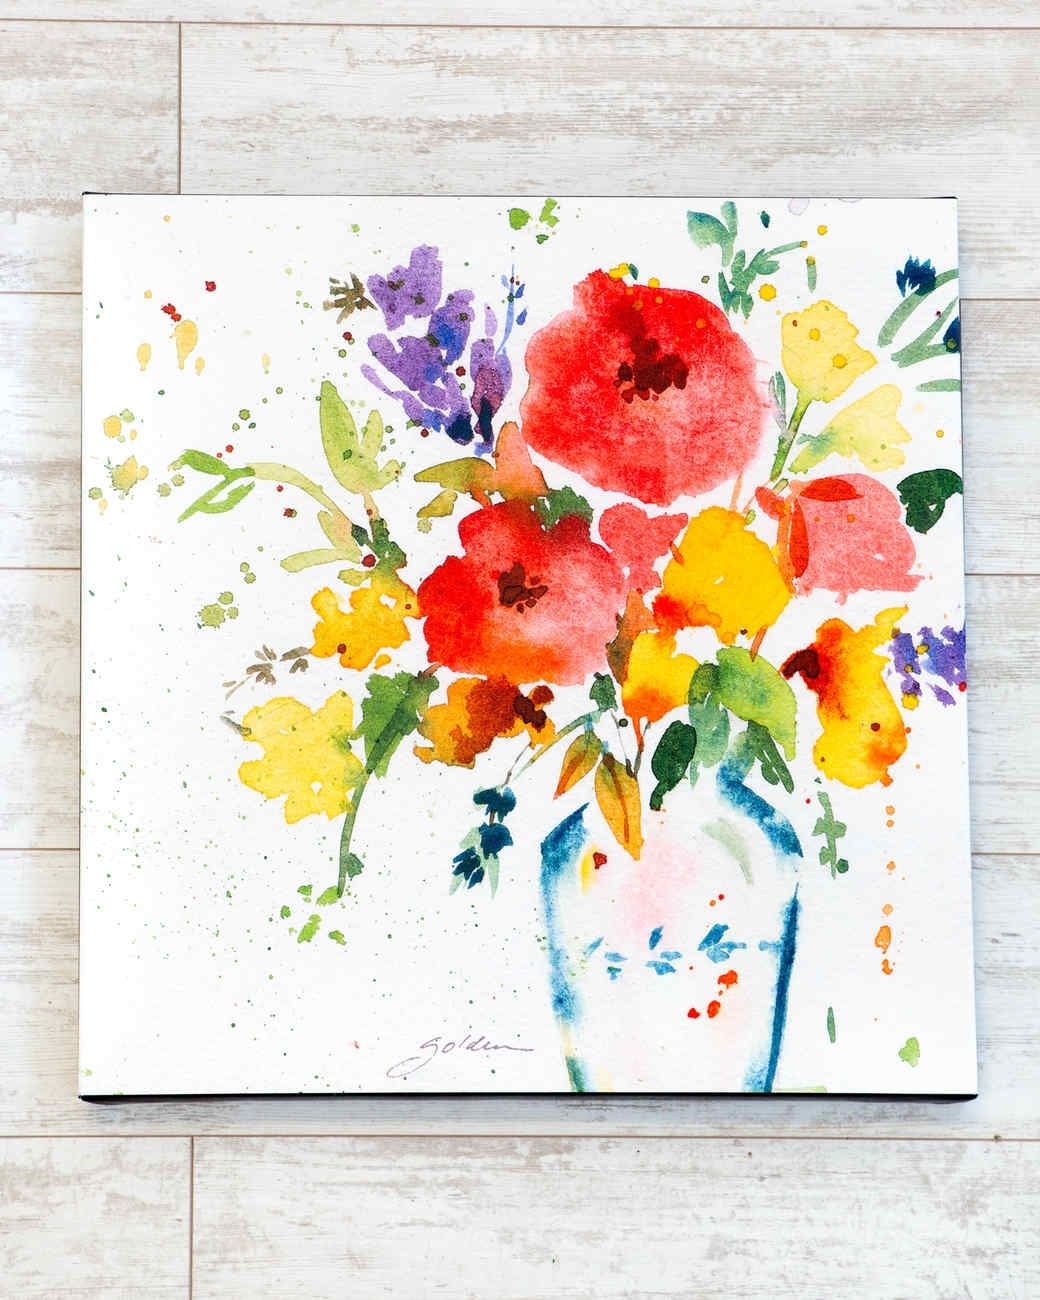 D Floral Canvas Good Floral Wall Art – Wall Decoration And Wall Art Intended For Floral Wall Art (View 6 of 20)